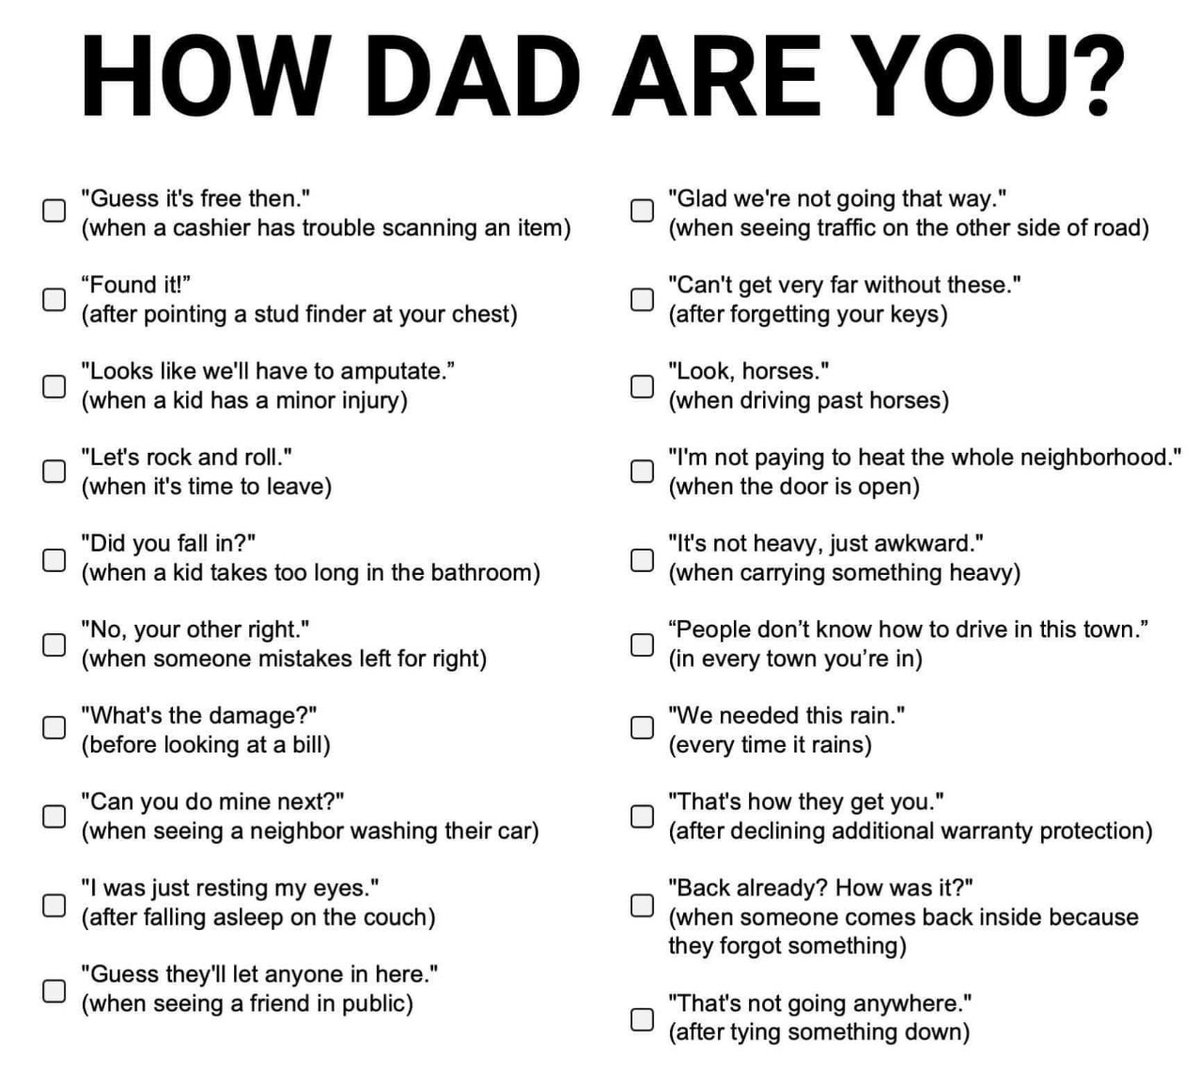 RT @JustinCaouette: How dad are you? https://t.co/BO7ak2yE7w